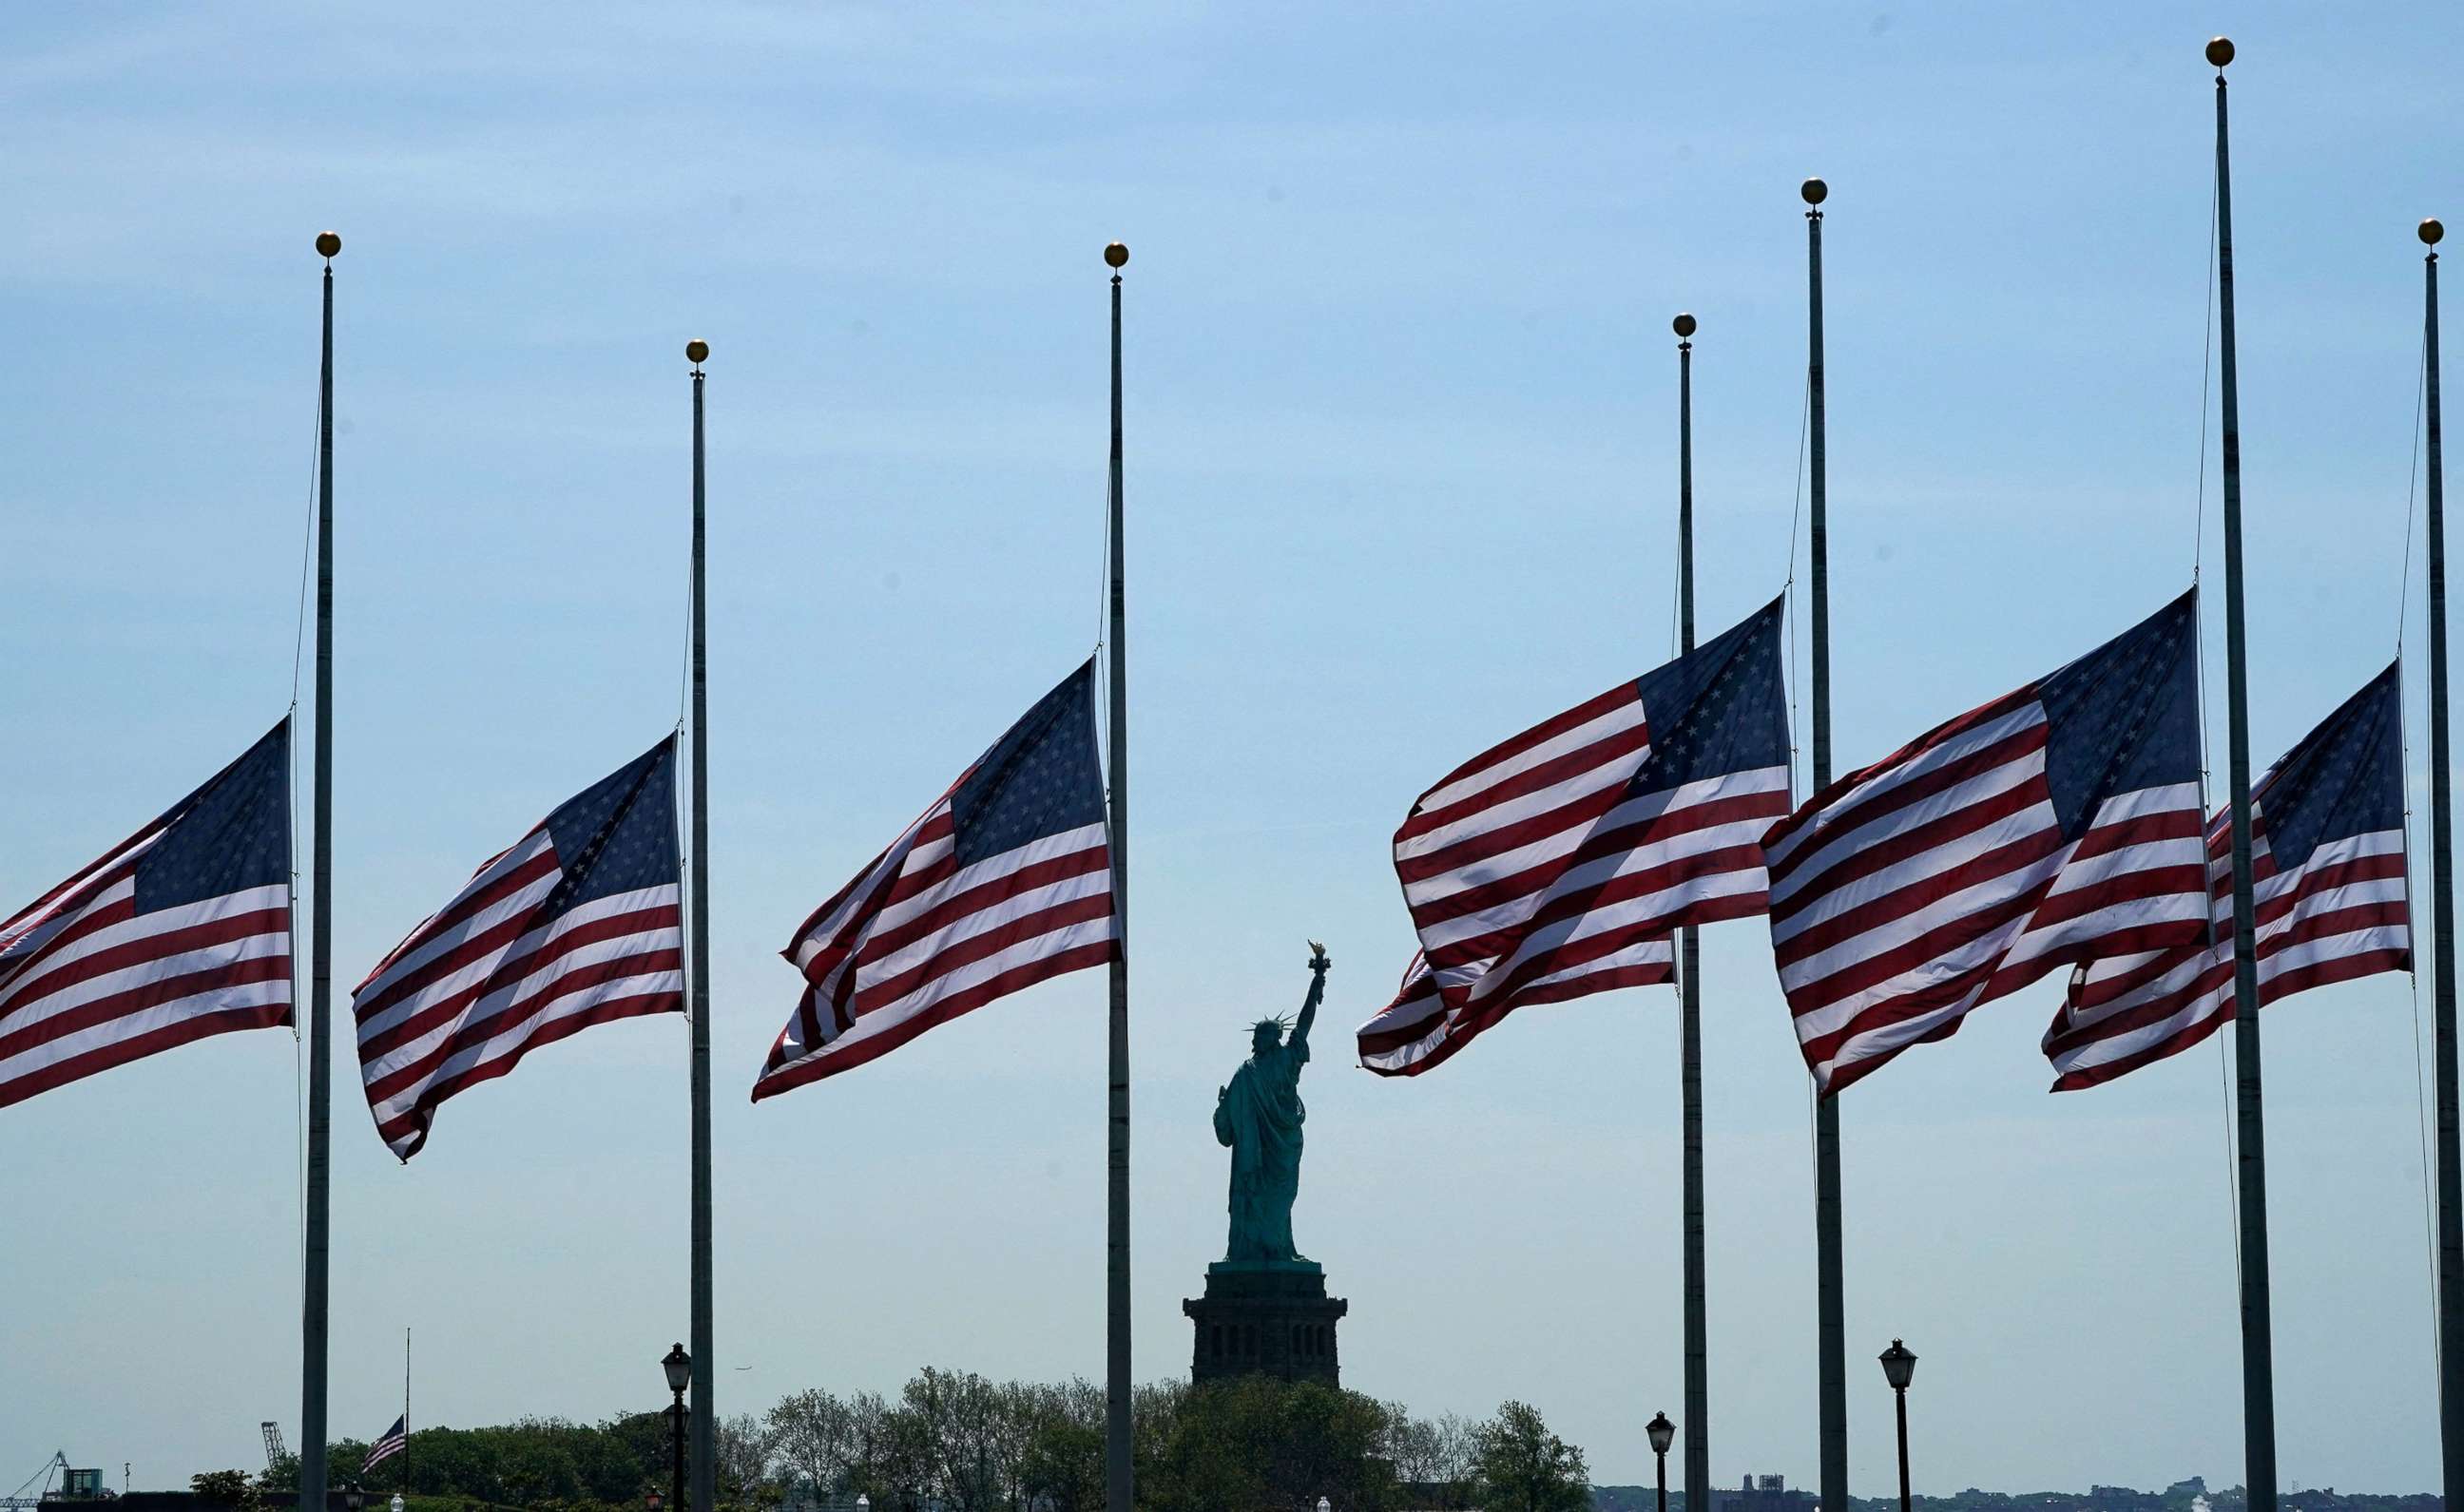 PHOTO: American flags fly at half-mast at Liberty State Park in Jersey City, N.J., across New York Bay from the Statue of Liberty, May 25, 2022, as a mark of respect for the victims of the May 24 shooting at Robb Elementary School in Uvalde, Texas.